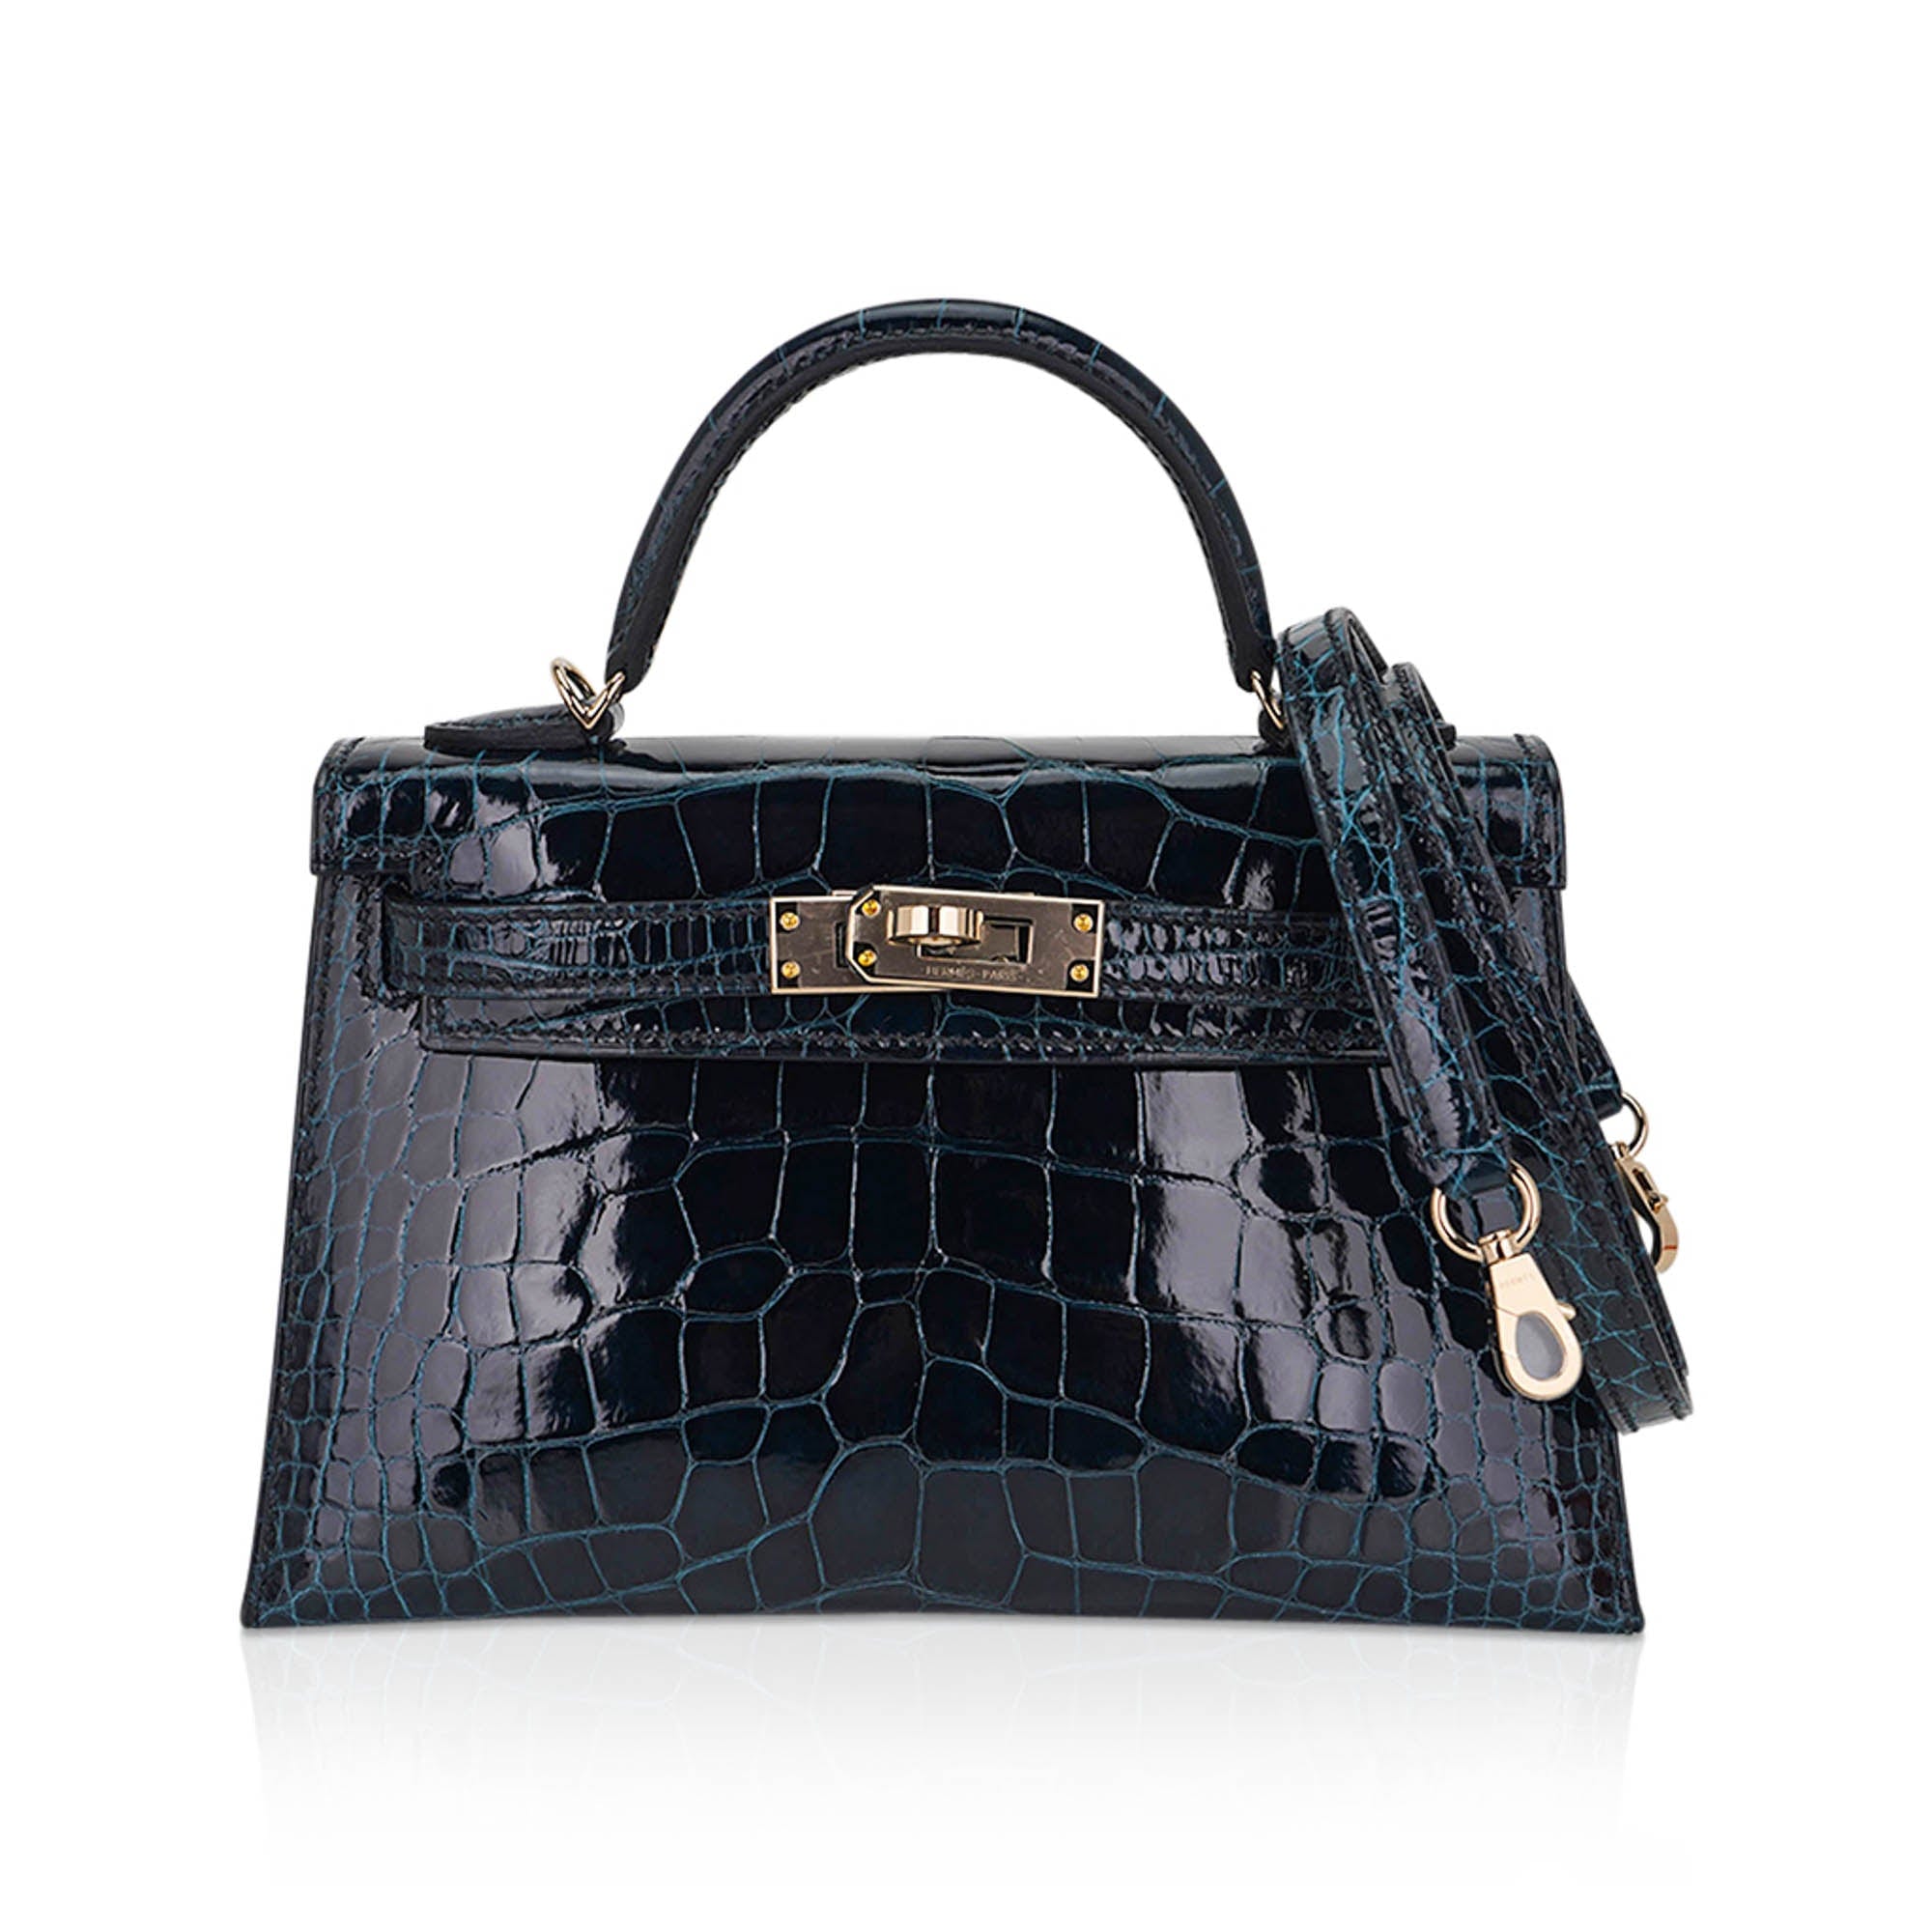 Hermes Limited Edition Verso Mini Kelly 20 Sellier Bag Vert Rousseau & Blue Paon Alligator with Permabrass Hardware